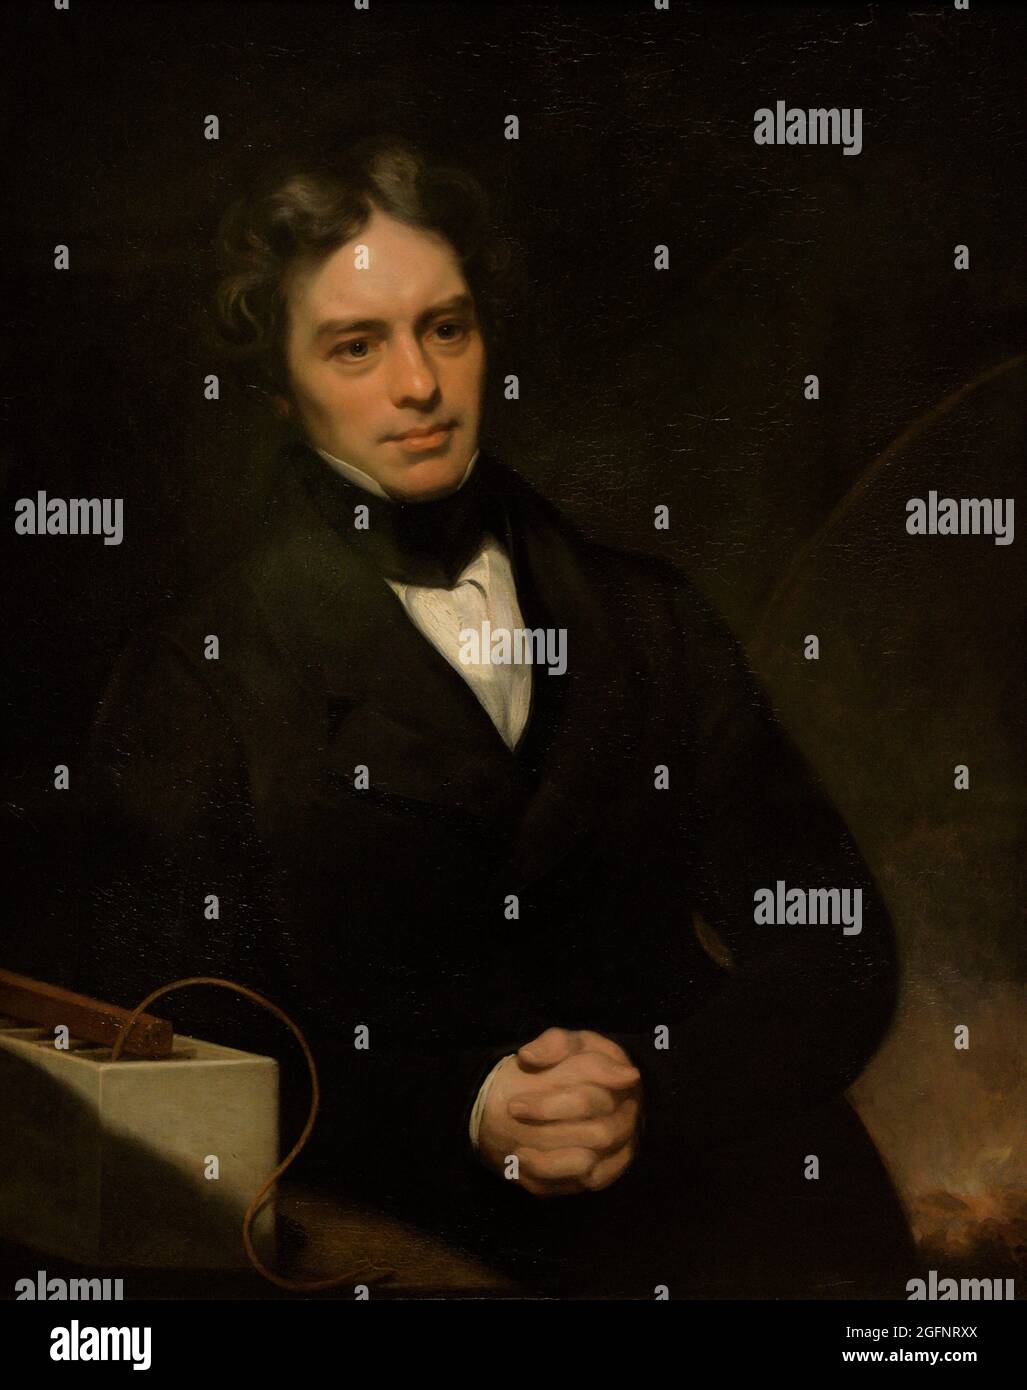 Michael Faraday (1791-1867). British physicist and chemist. Discoverer of electro-magnetic induction and electrolysis. Portrait by Thomas Phillips (1770-1845). Oil on canvas (90,8 x 71,1 cm), 1841-1842. National Portrait Gallery. London, England, United Kingdom. Stock Photo